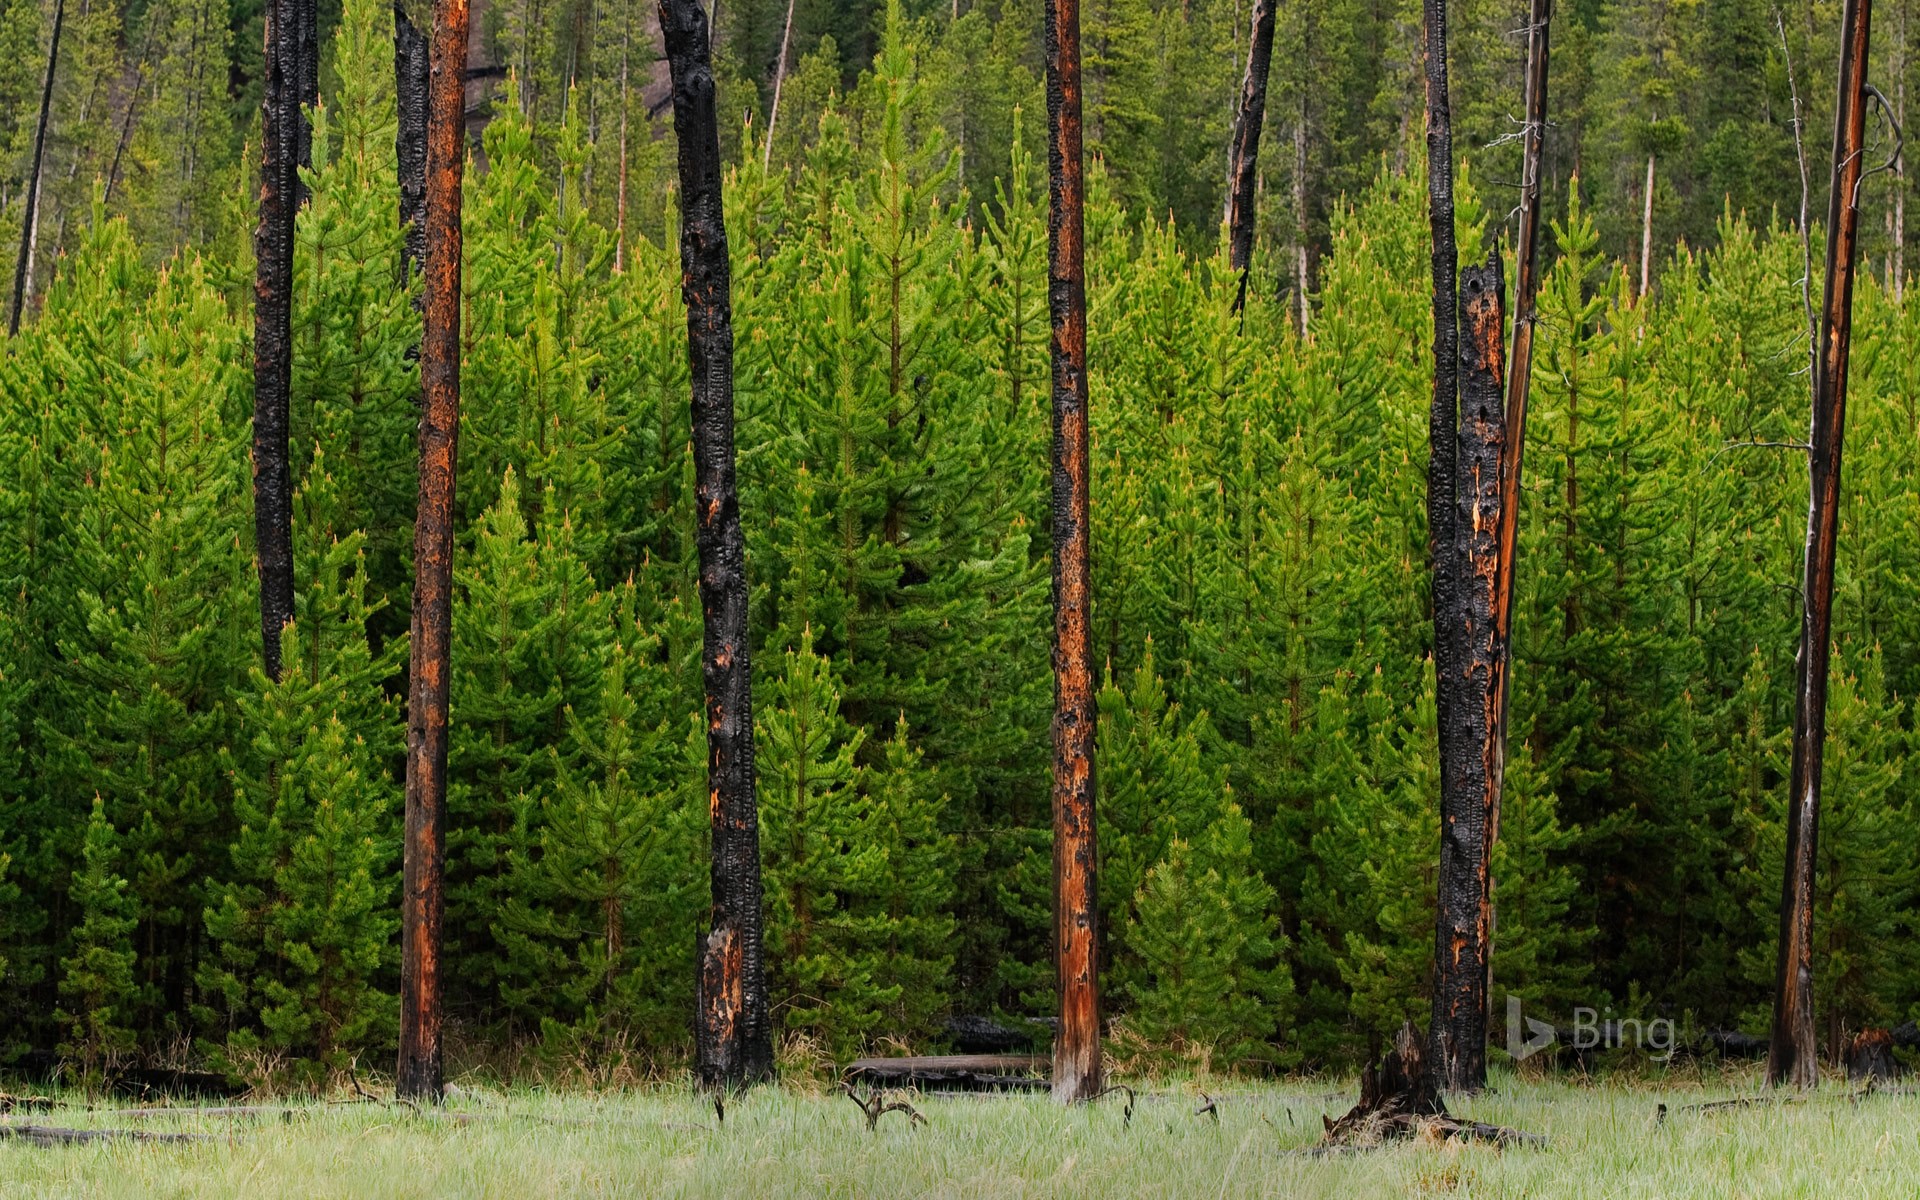 Young trees grow amid trees burned in the 1988 fire in Yellowstone National Park, Wyoming